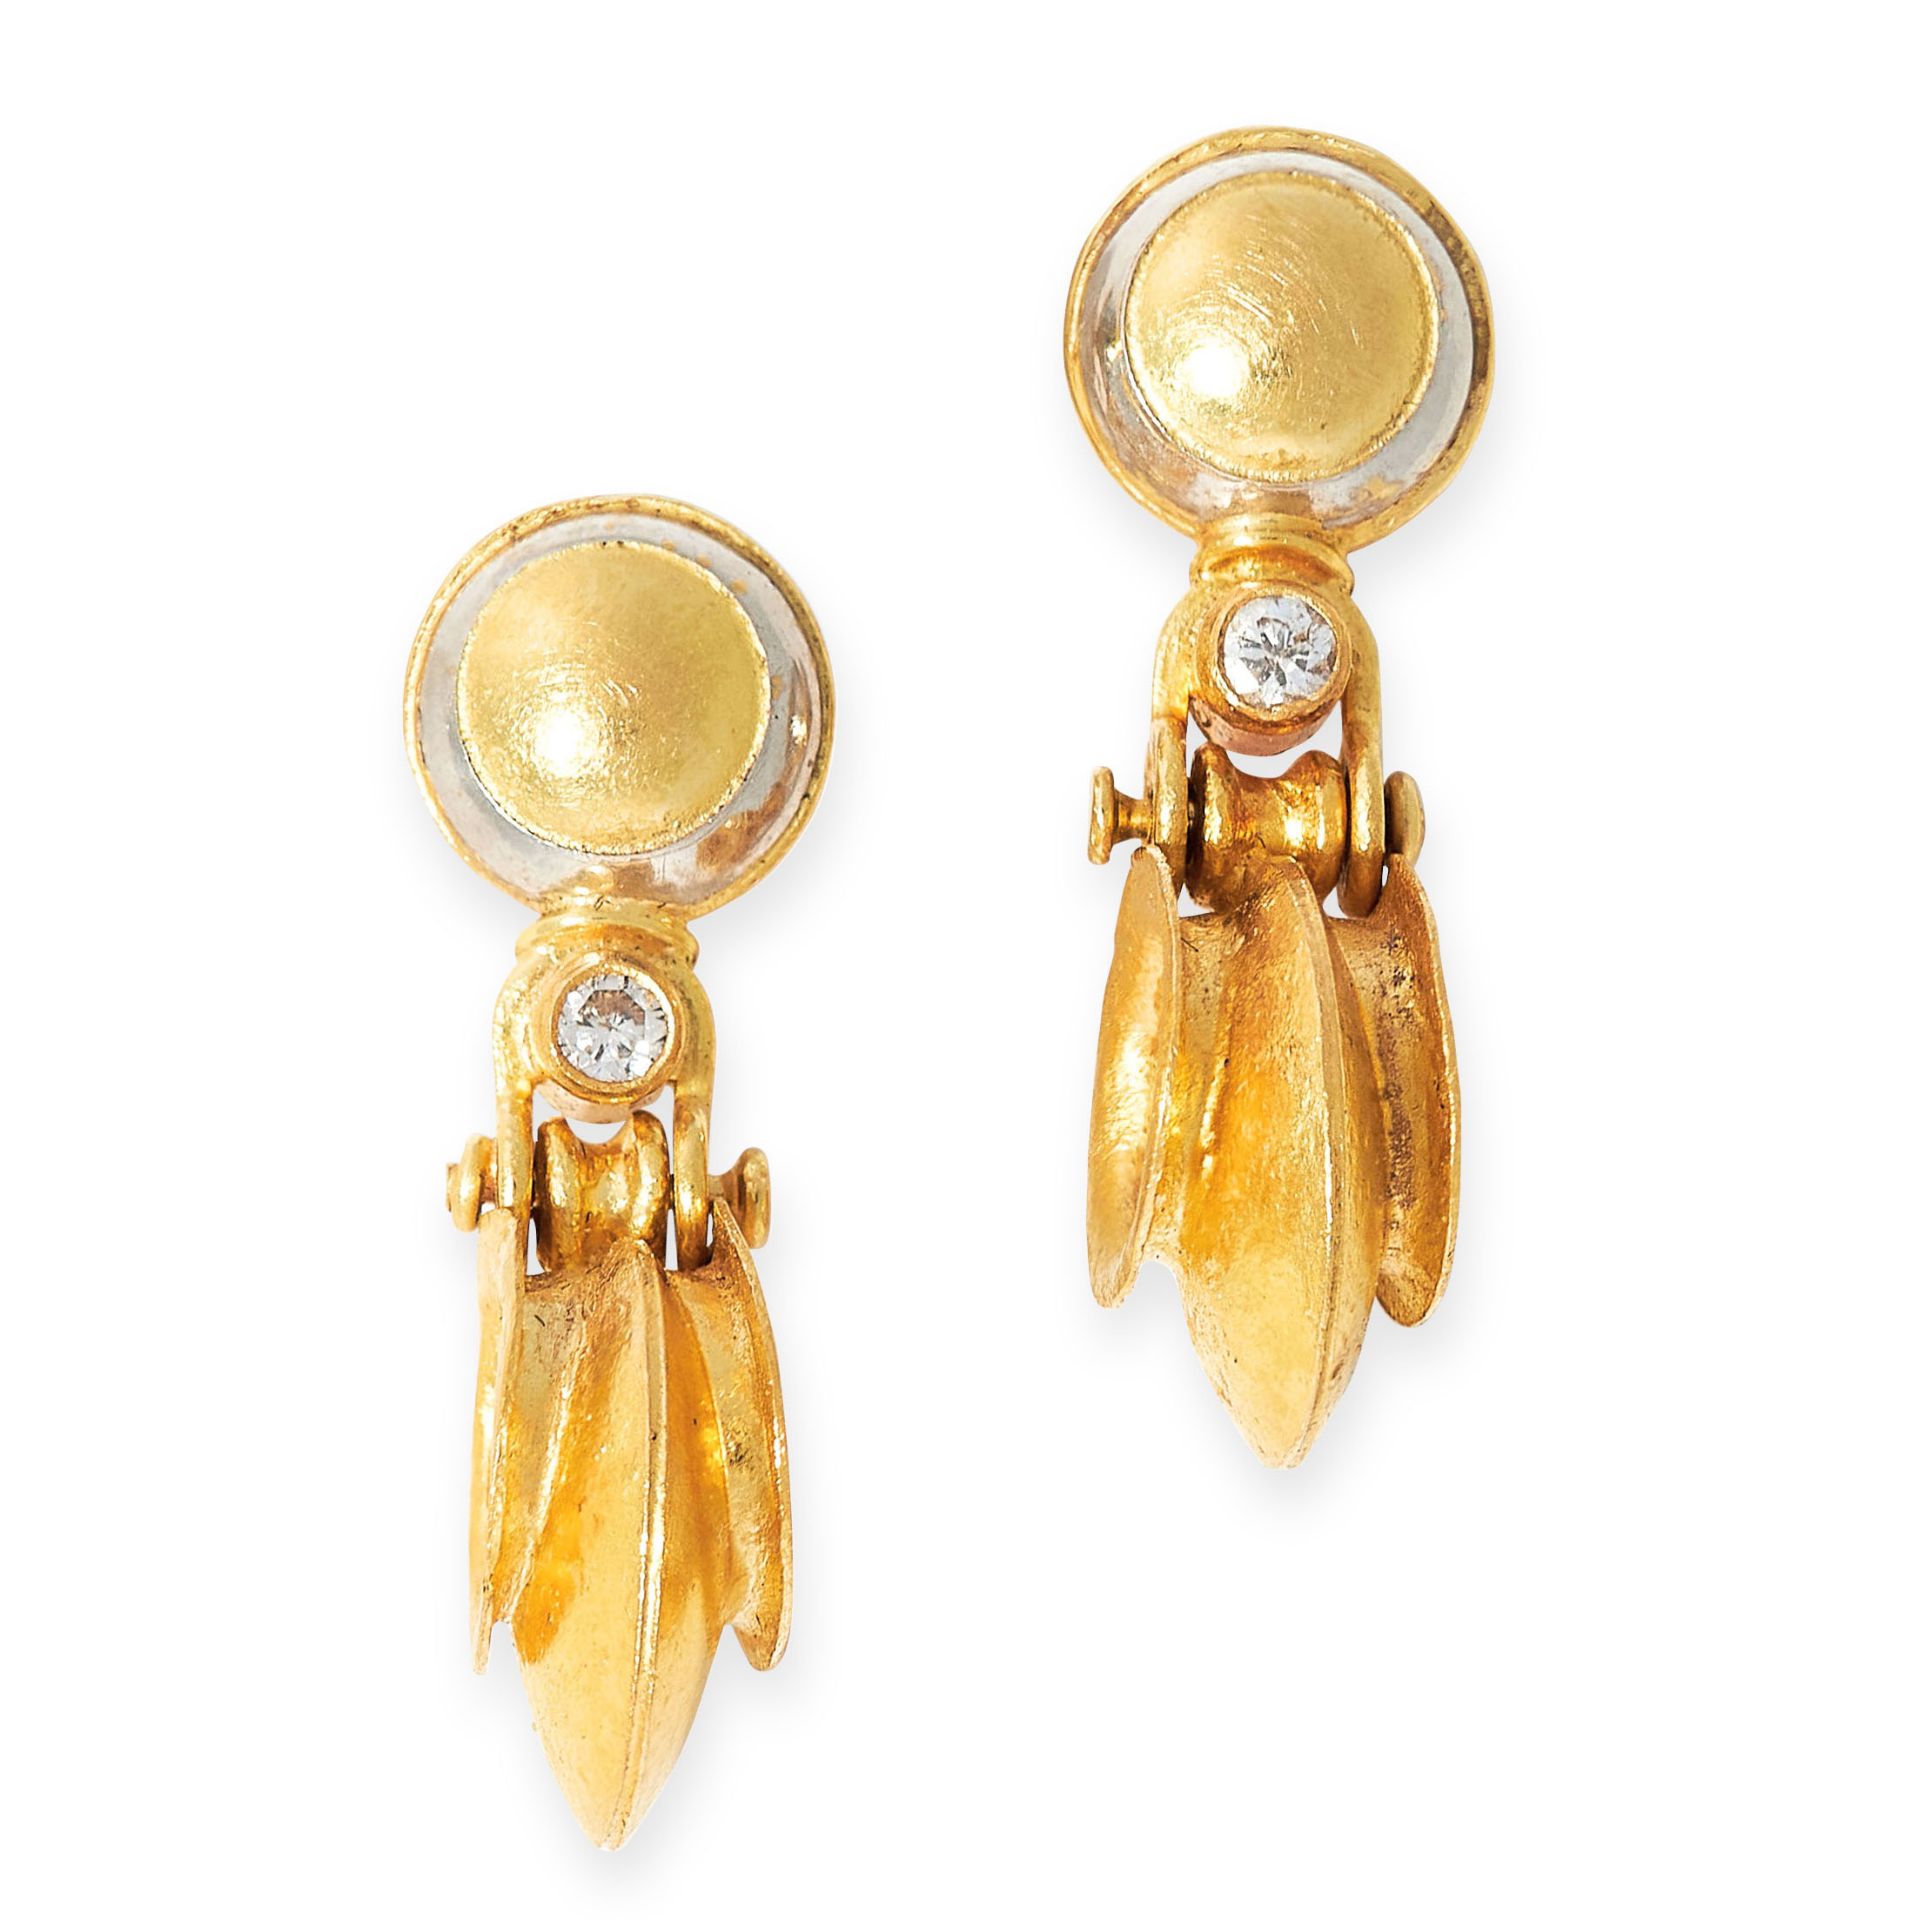 PAIR OF VINTAGE DIAMOND EARRINGS in drop design, each set with a round cut diamond and an